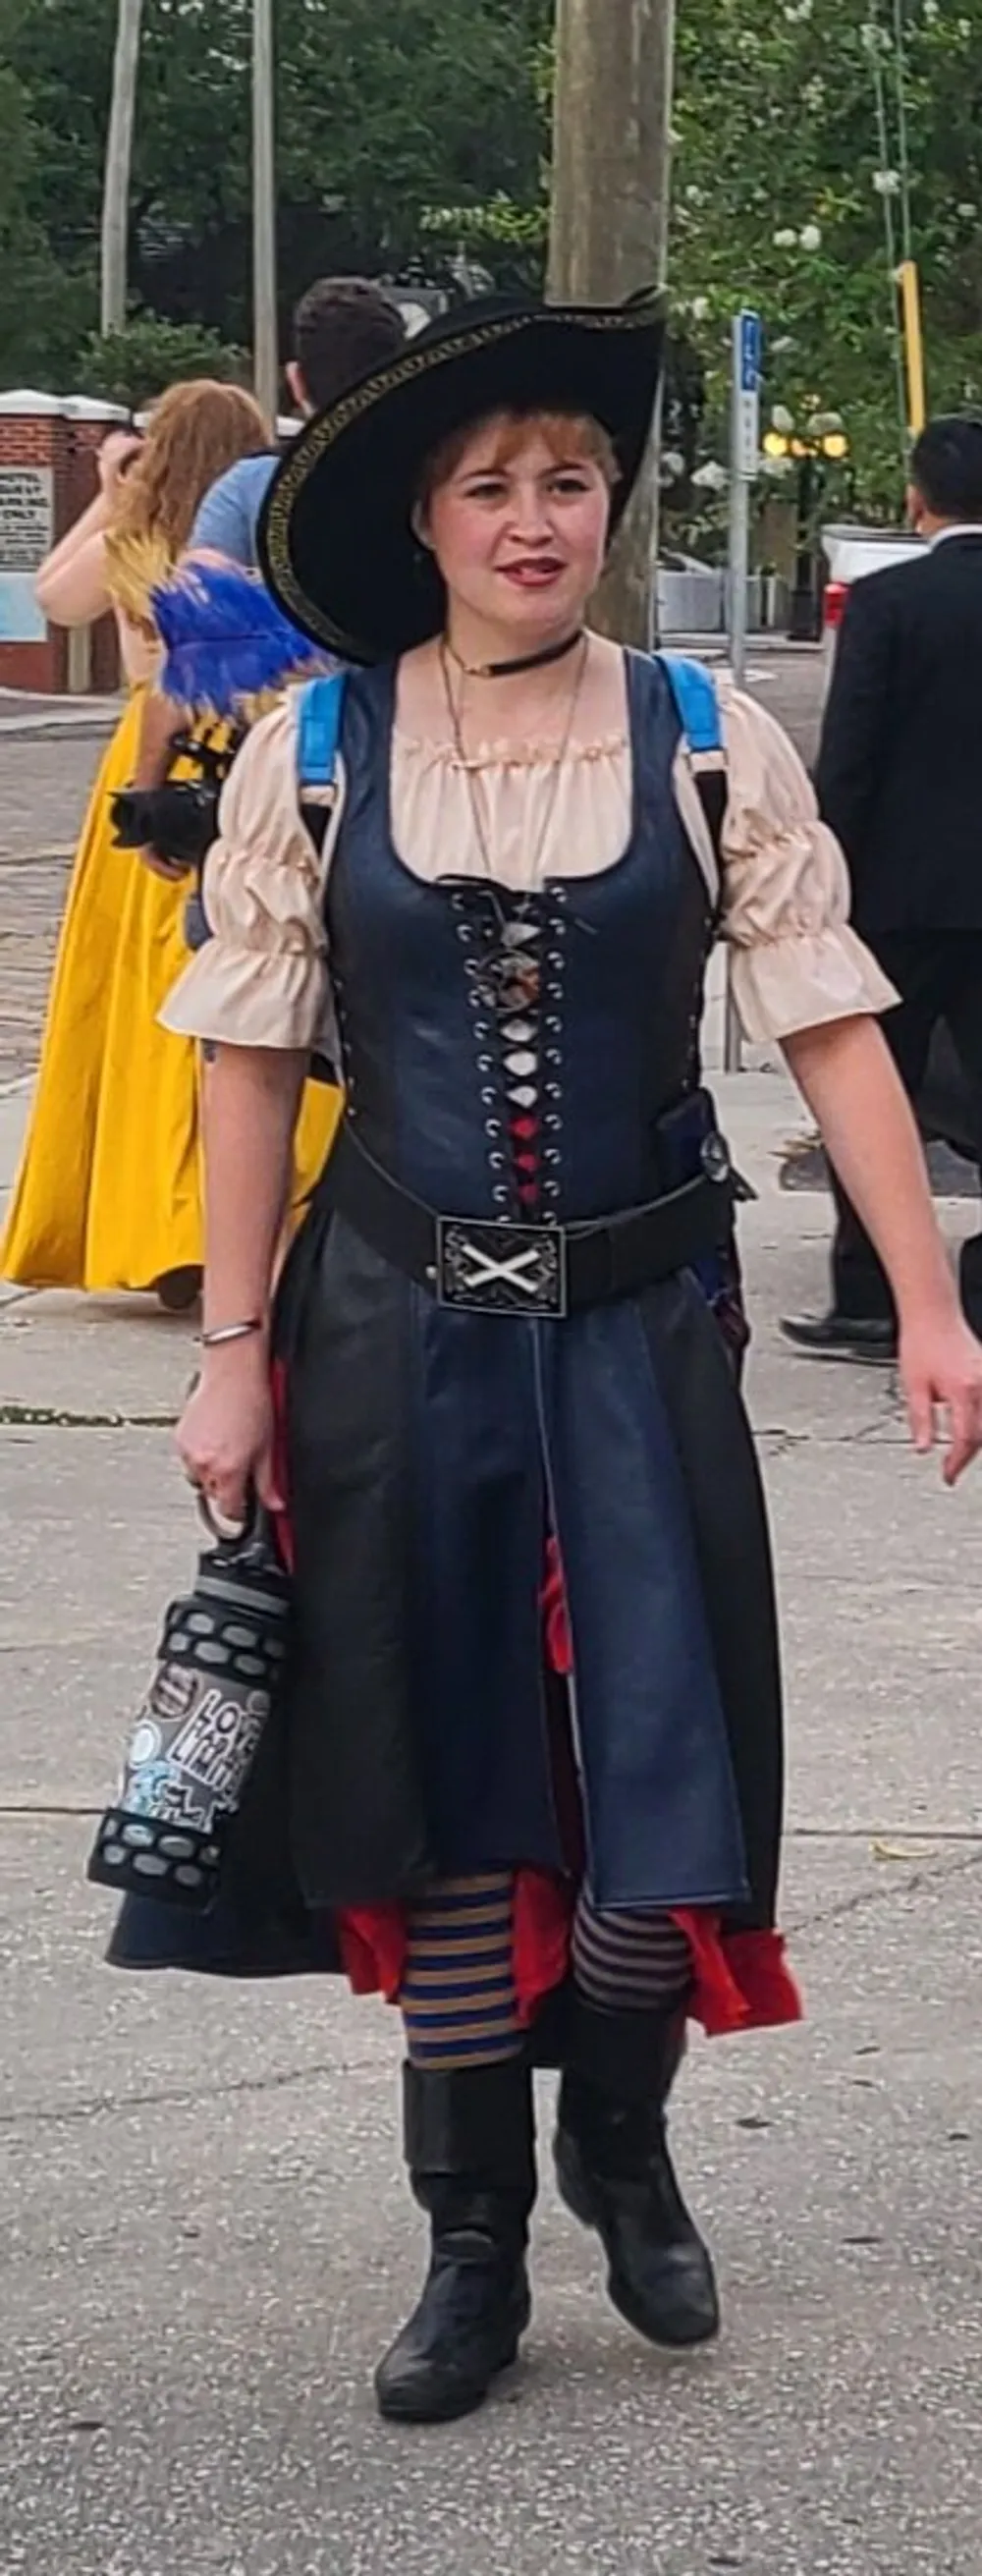 A person is dressed in pirate-inspired attire complete with a tricorn hat and a corset at an outdoor event